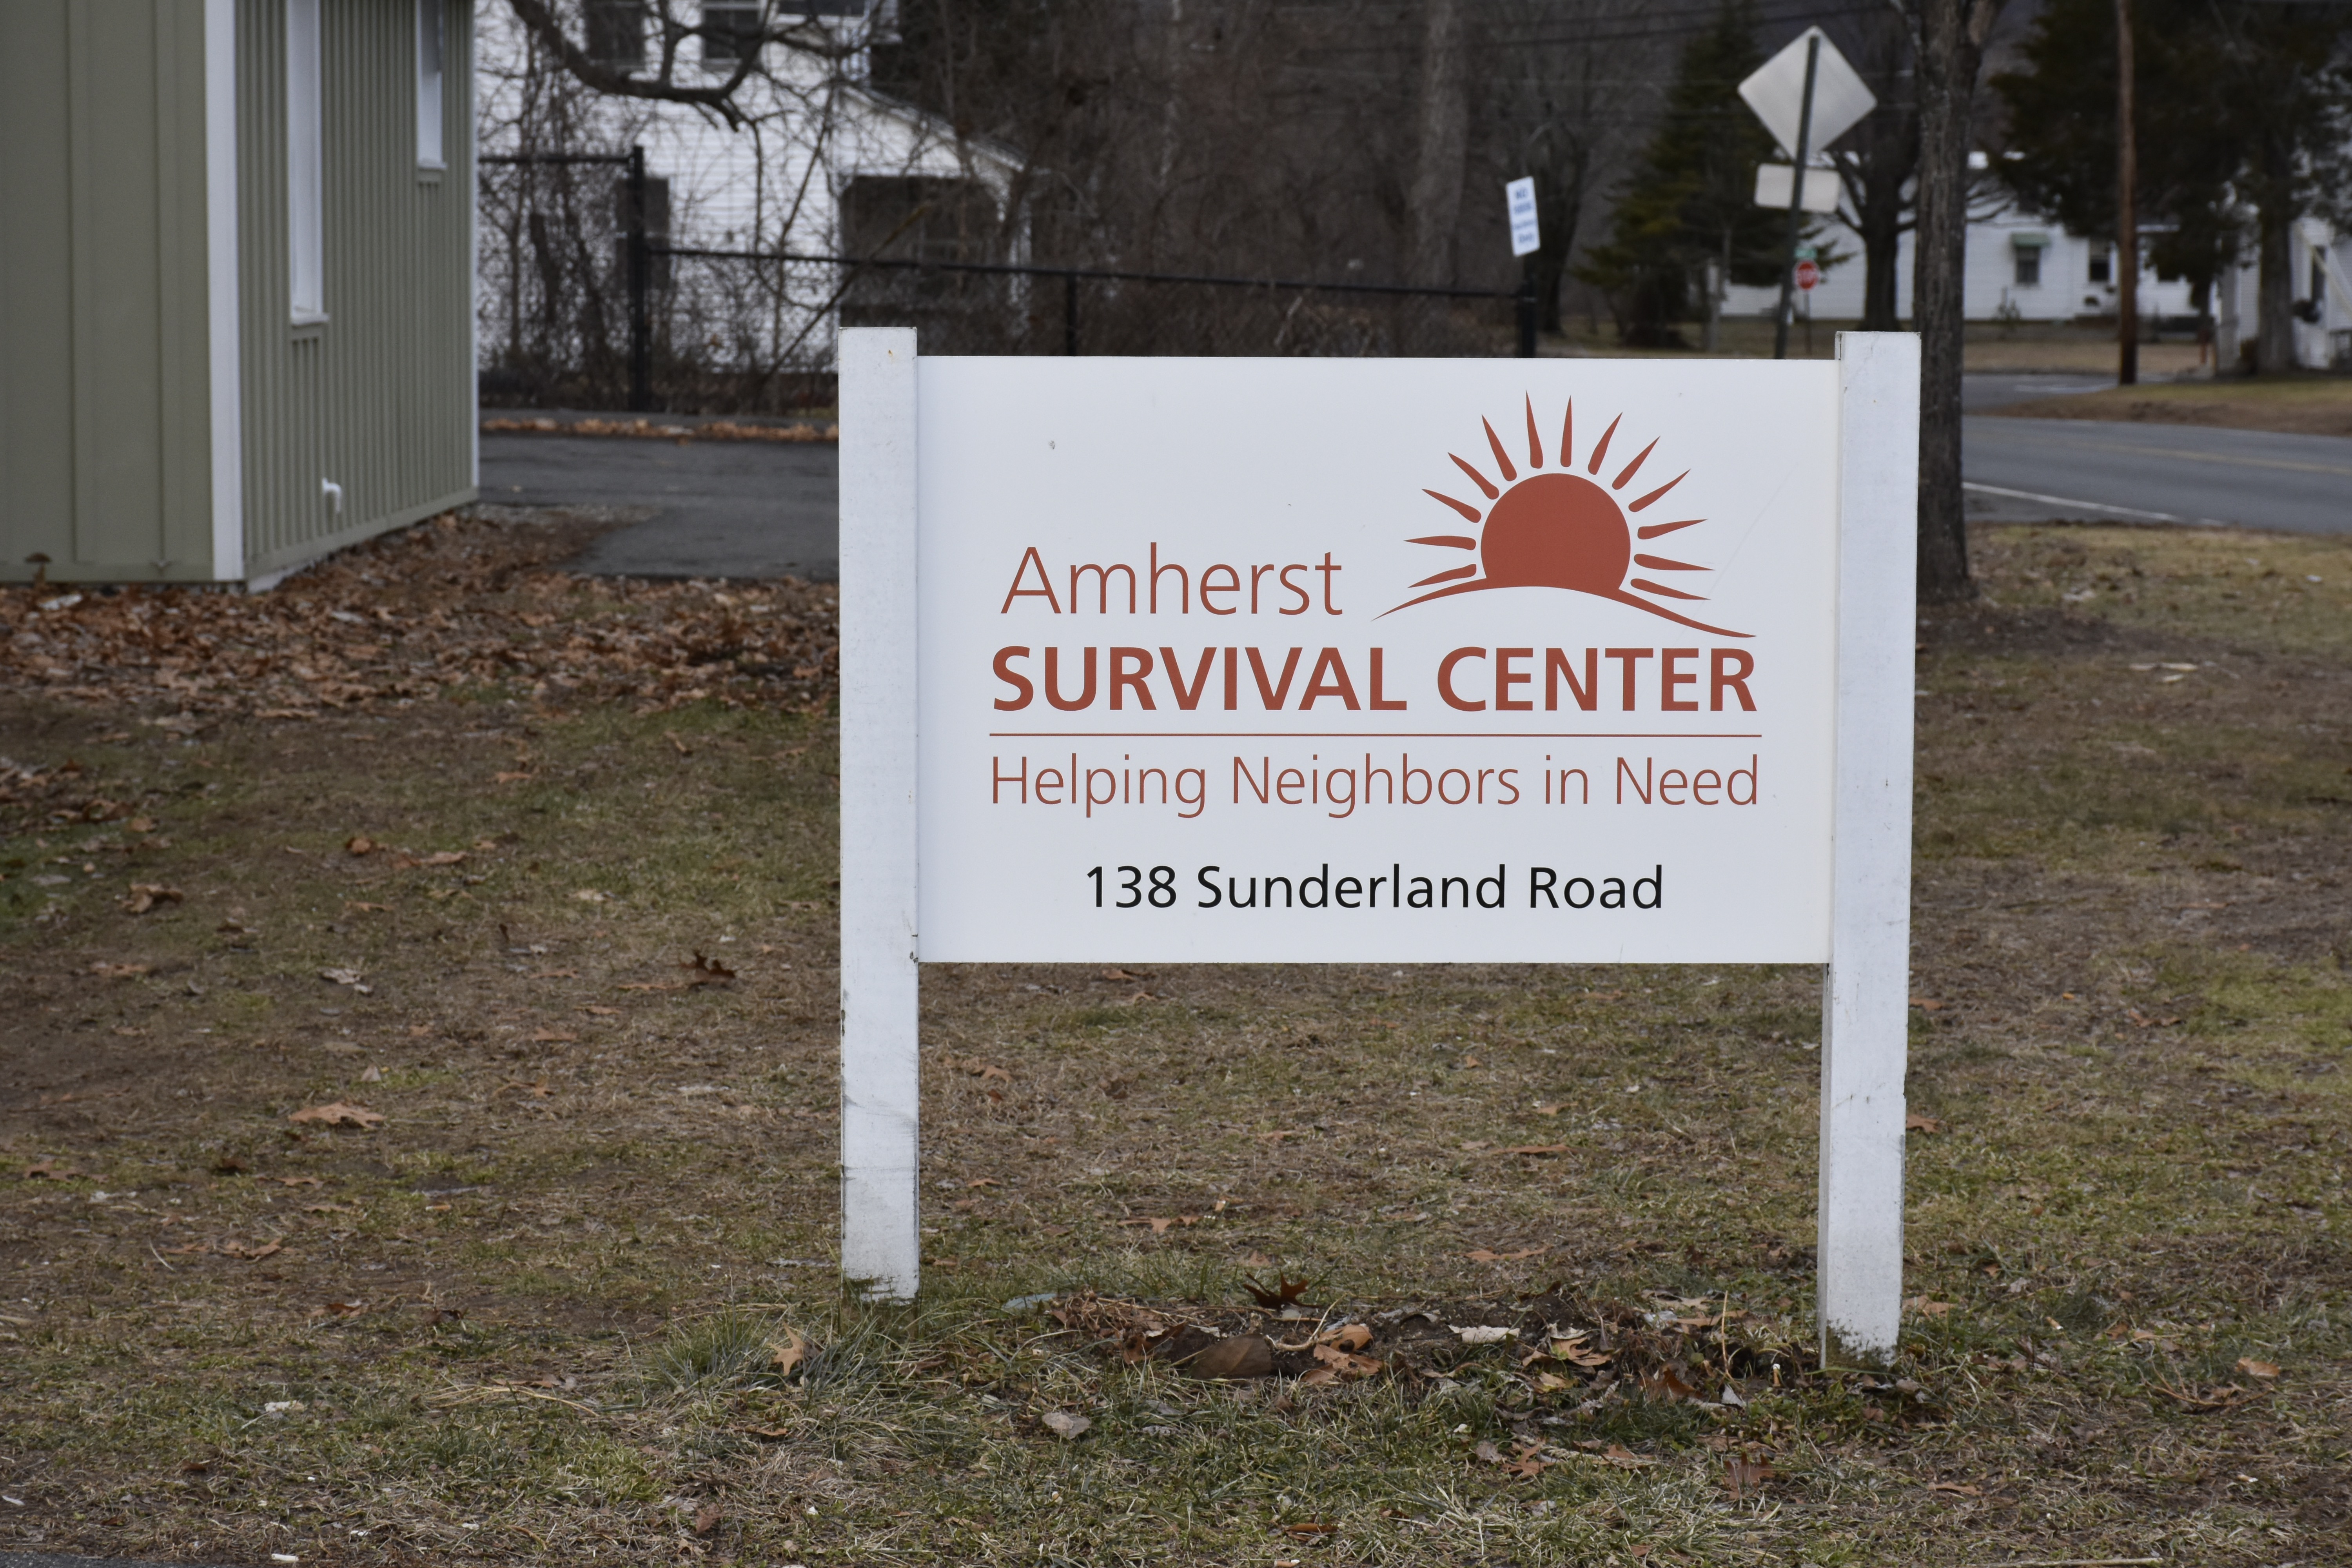 Feedback Live: Amherst Survival Center — Amherst Downtown